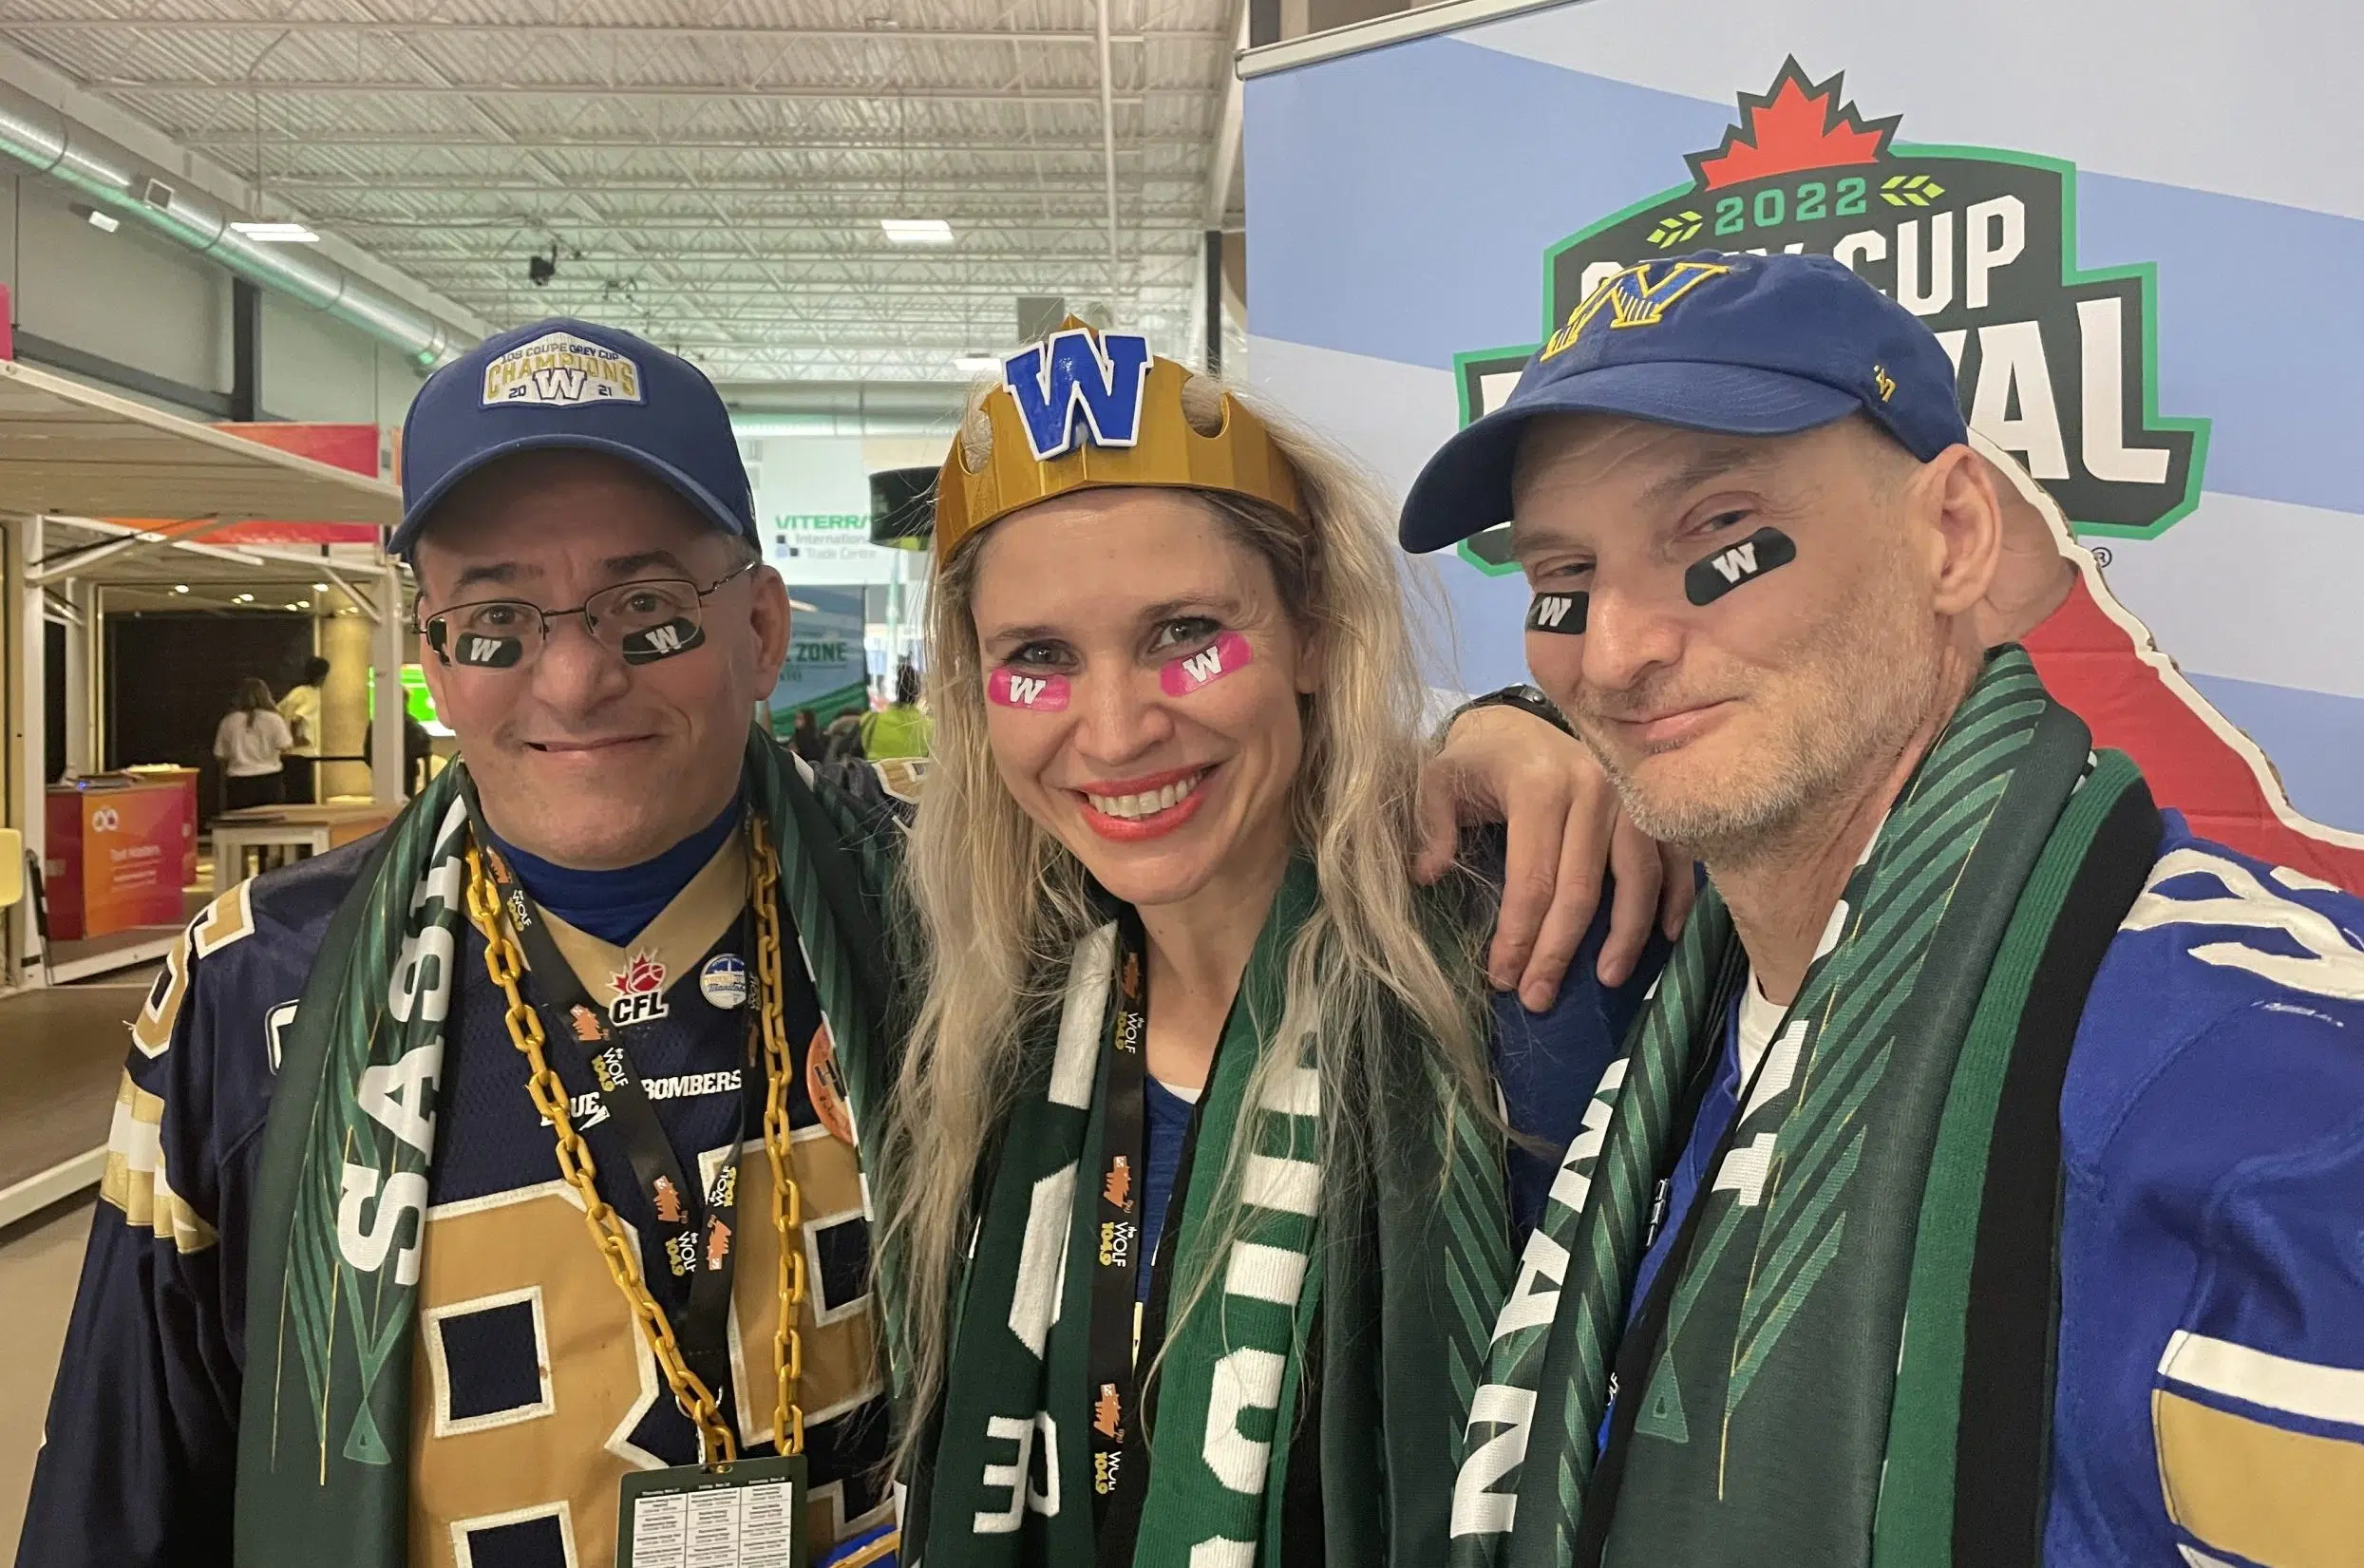 'The best sporting event:' Blue Bomber superfans meet up again at Grey Cup